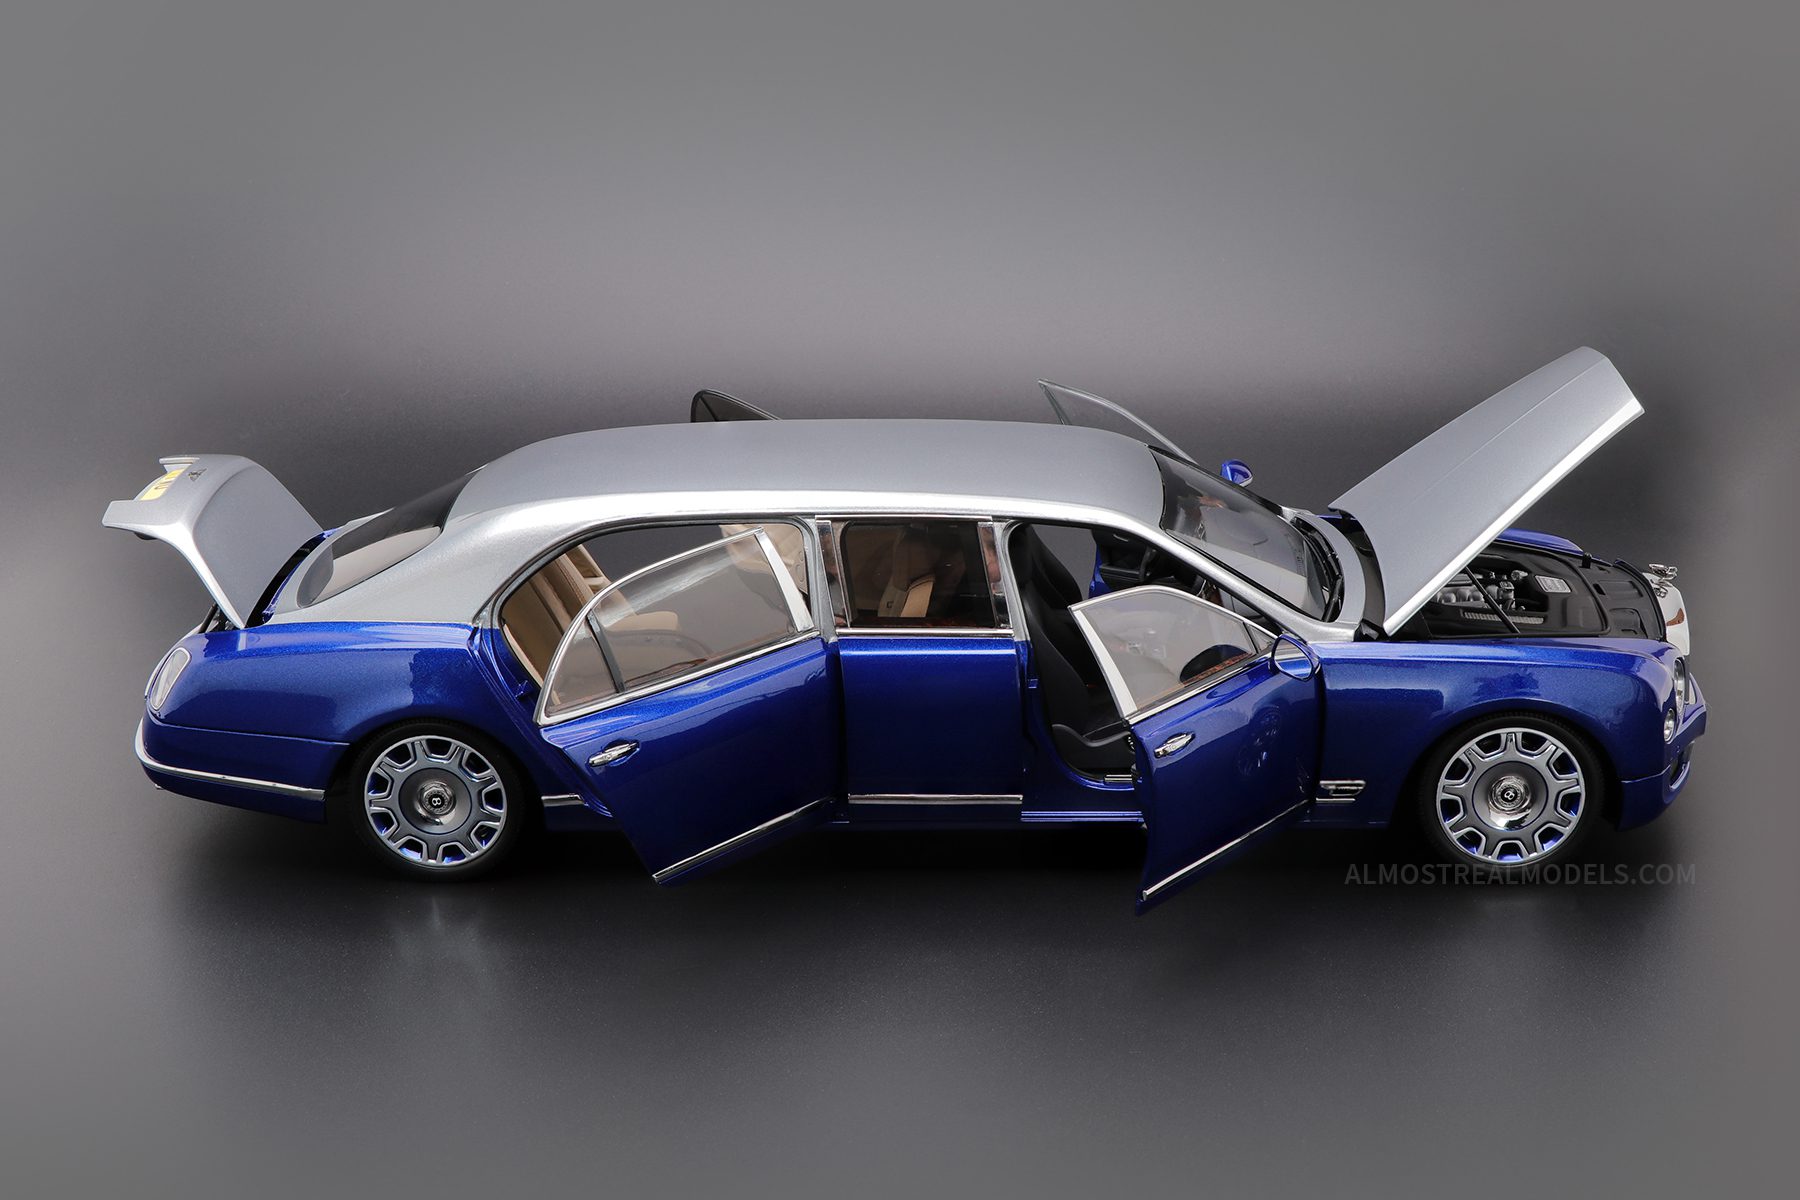 Bentley Mulsanne Grand Limousine by Mulliner - 2017 - Silver Frost Moroccan Blue 1:18